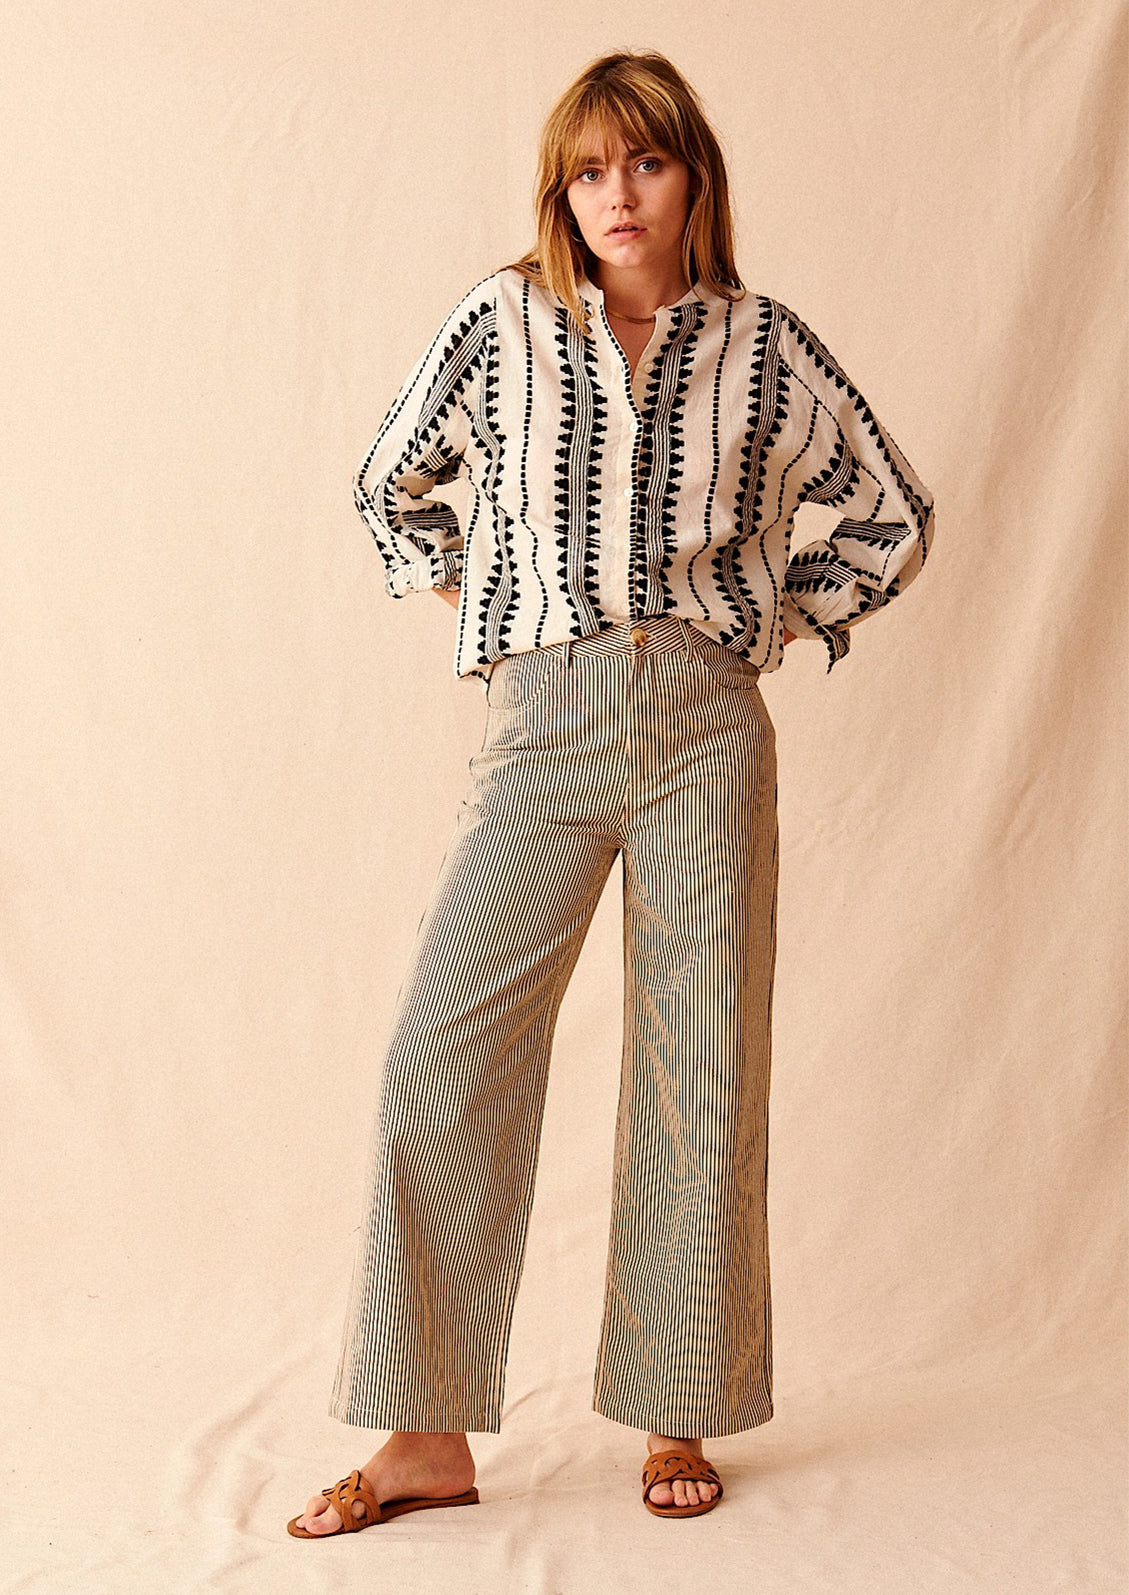 A woman standing wearing cream and black pinstriped wide leg jeans with brown sandals and cream and black embroidered top